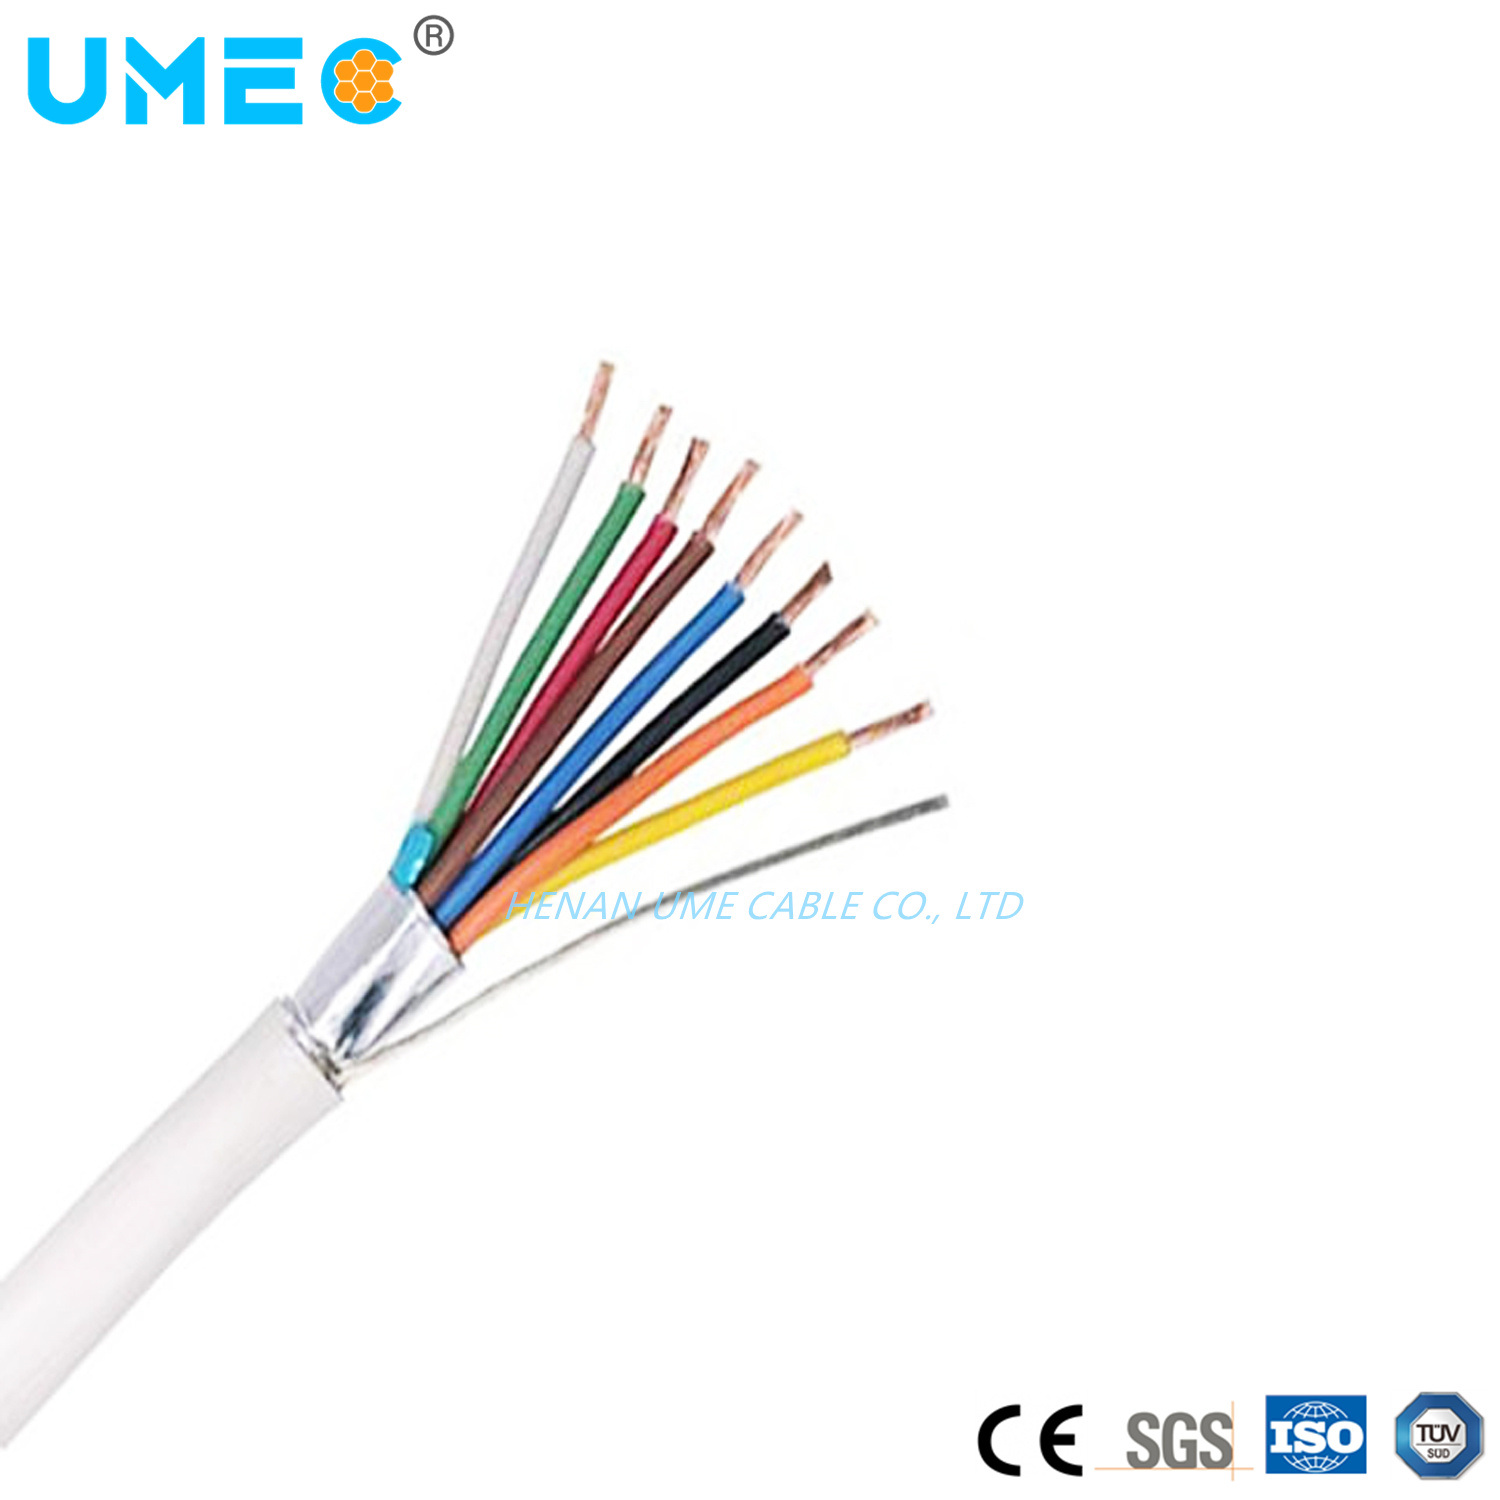 XLPE Insulated PVC Sheathed Cu Conductor Flexible Control Cable